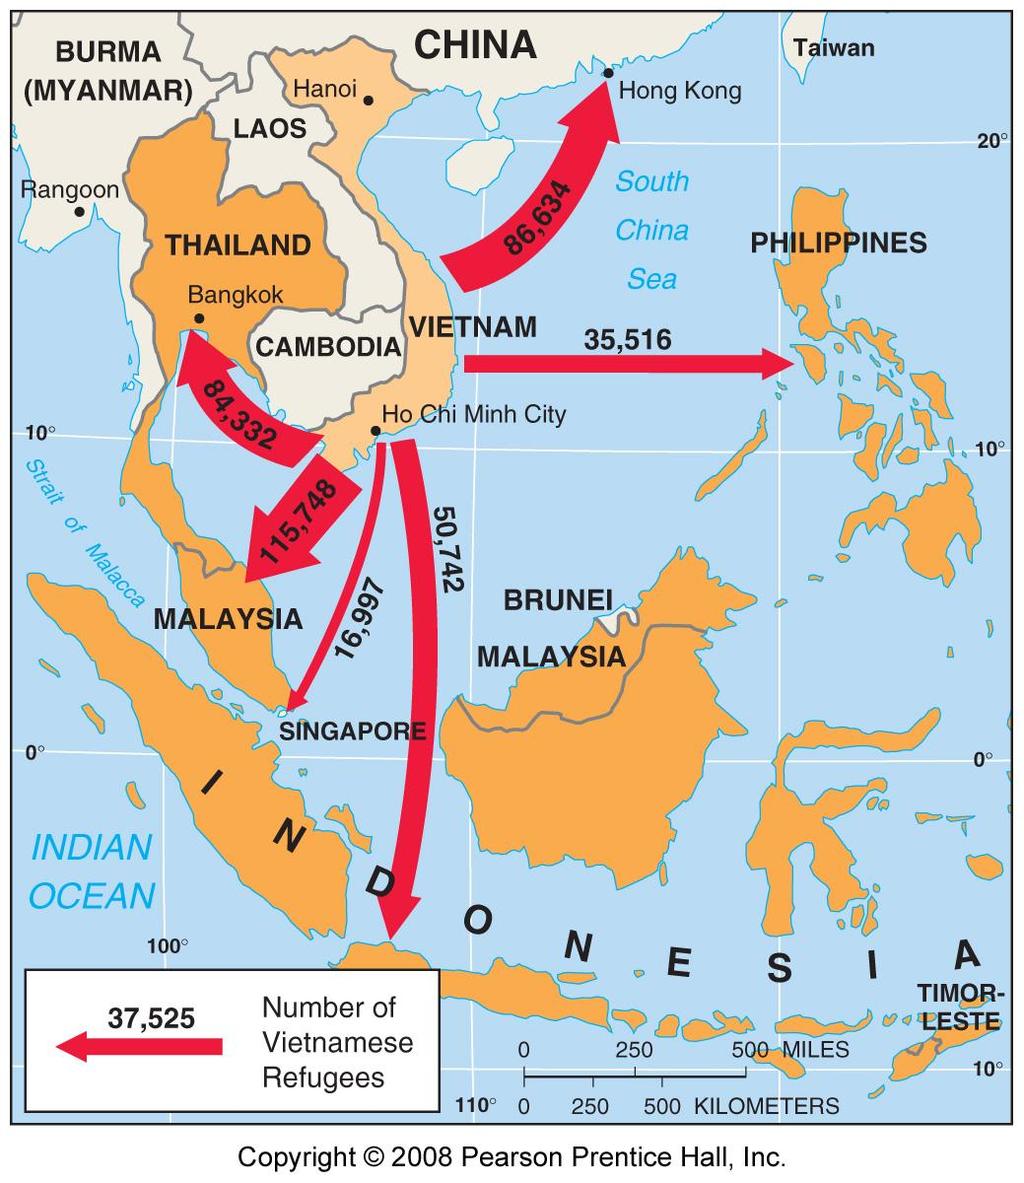 Migration of Vietnamese Boat People Many Vietnamese fled by sea as refugees after the war with the U.S. ended in 1975.